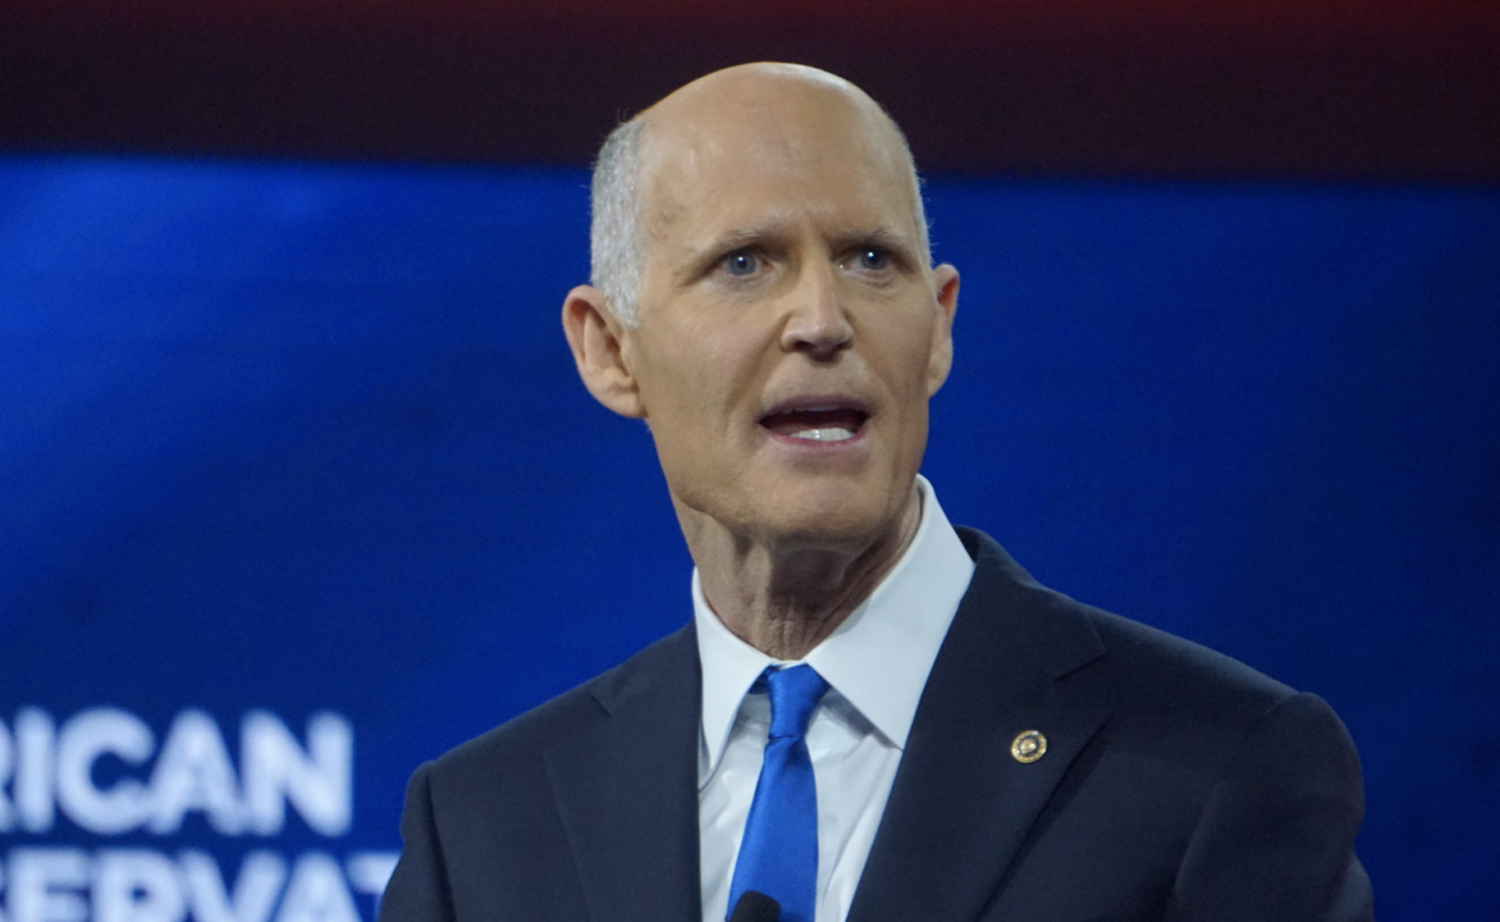 Rick Scott Introduces the ‘Let’s Get to Work Act’; Embodies Former Campaign Slogan